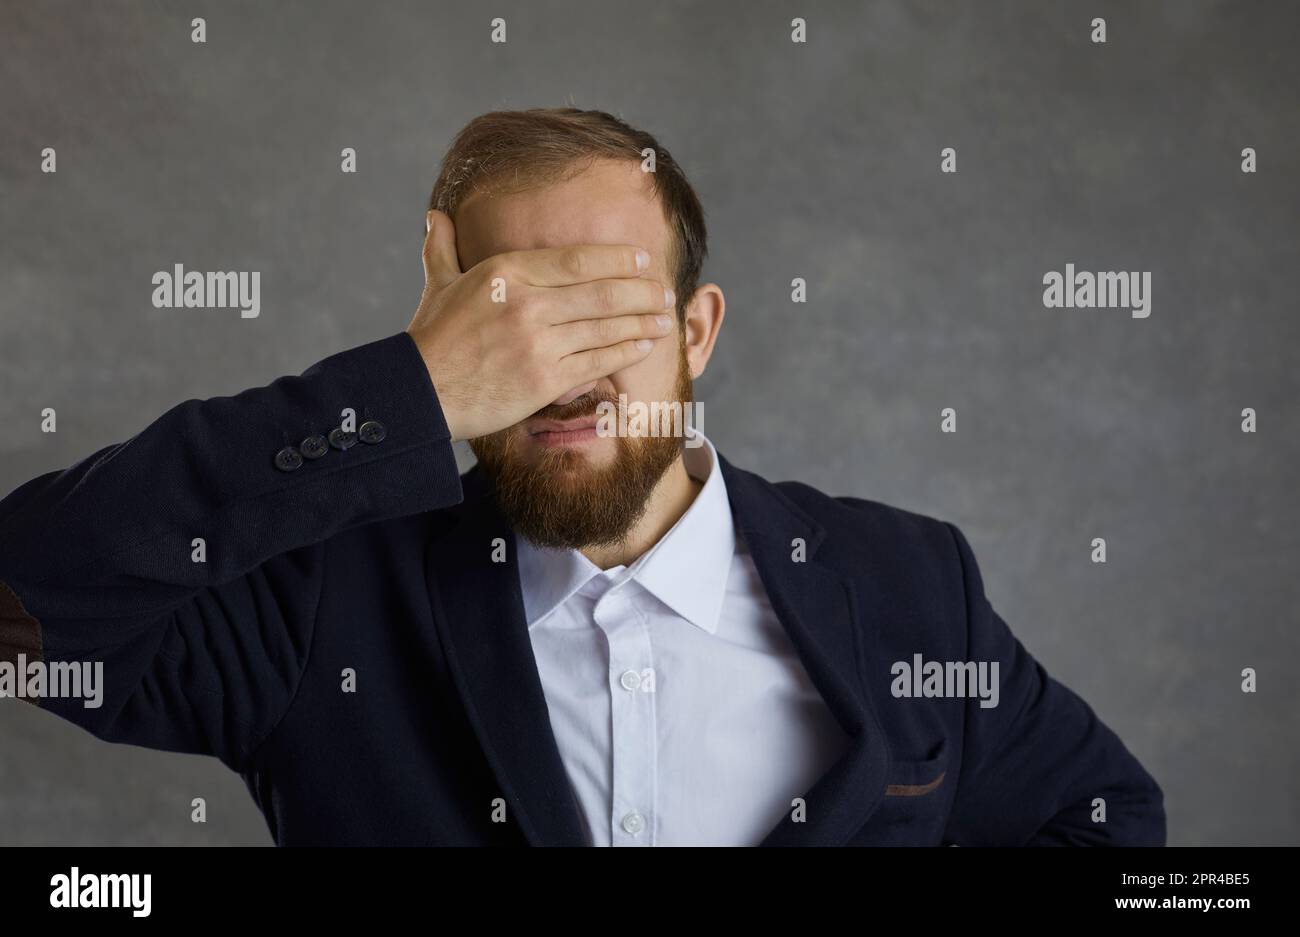 Frustrated businessman closes his eyes with his hand, not wanting to see anything or anyone. Stock Photo